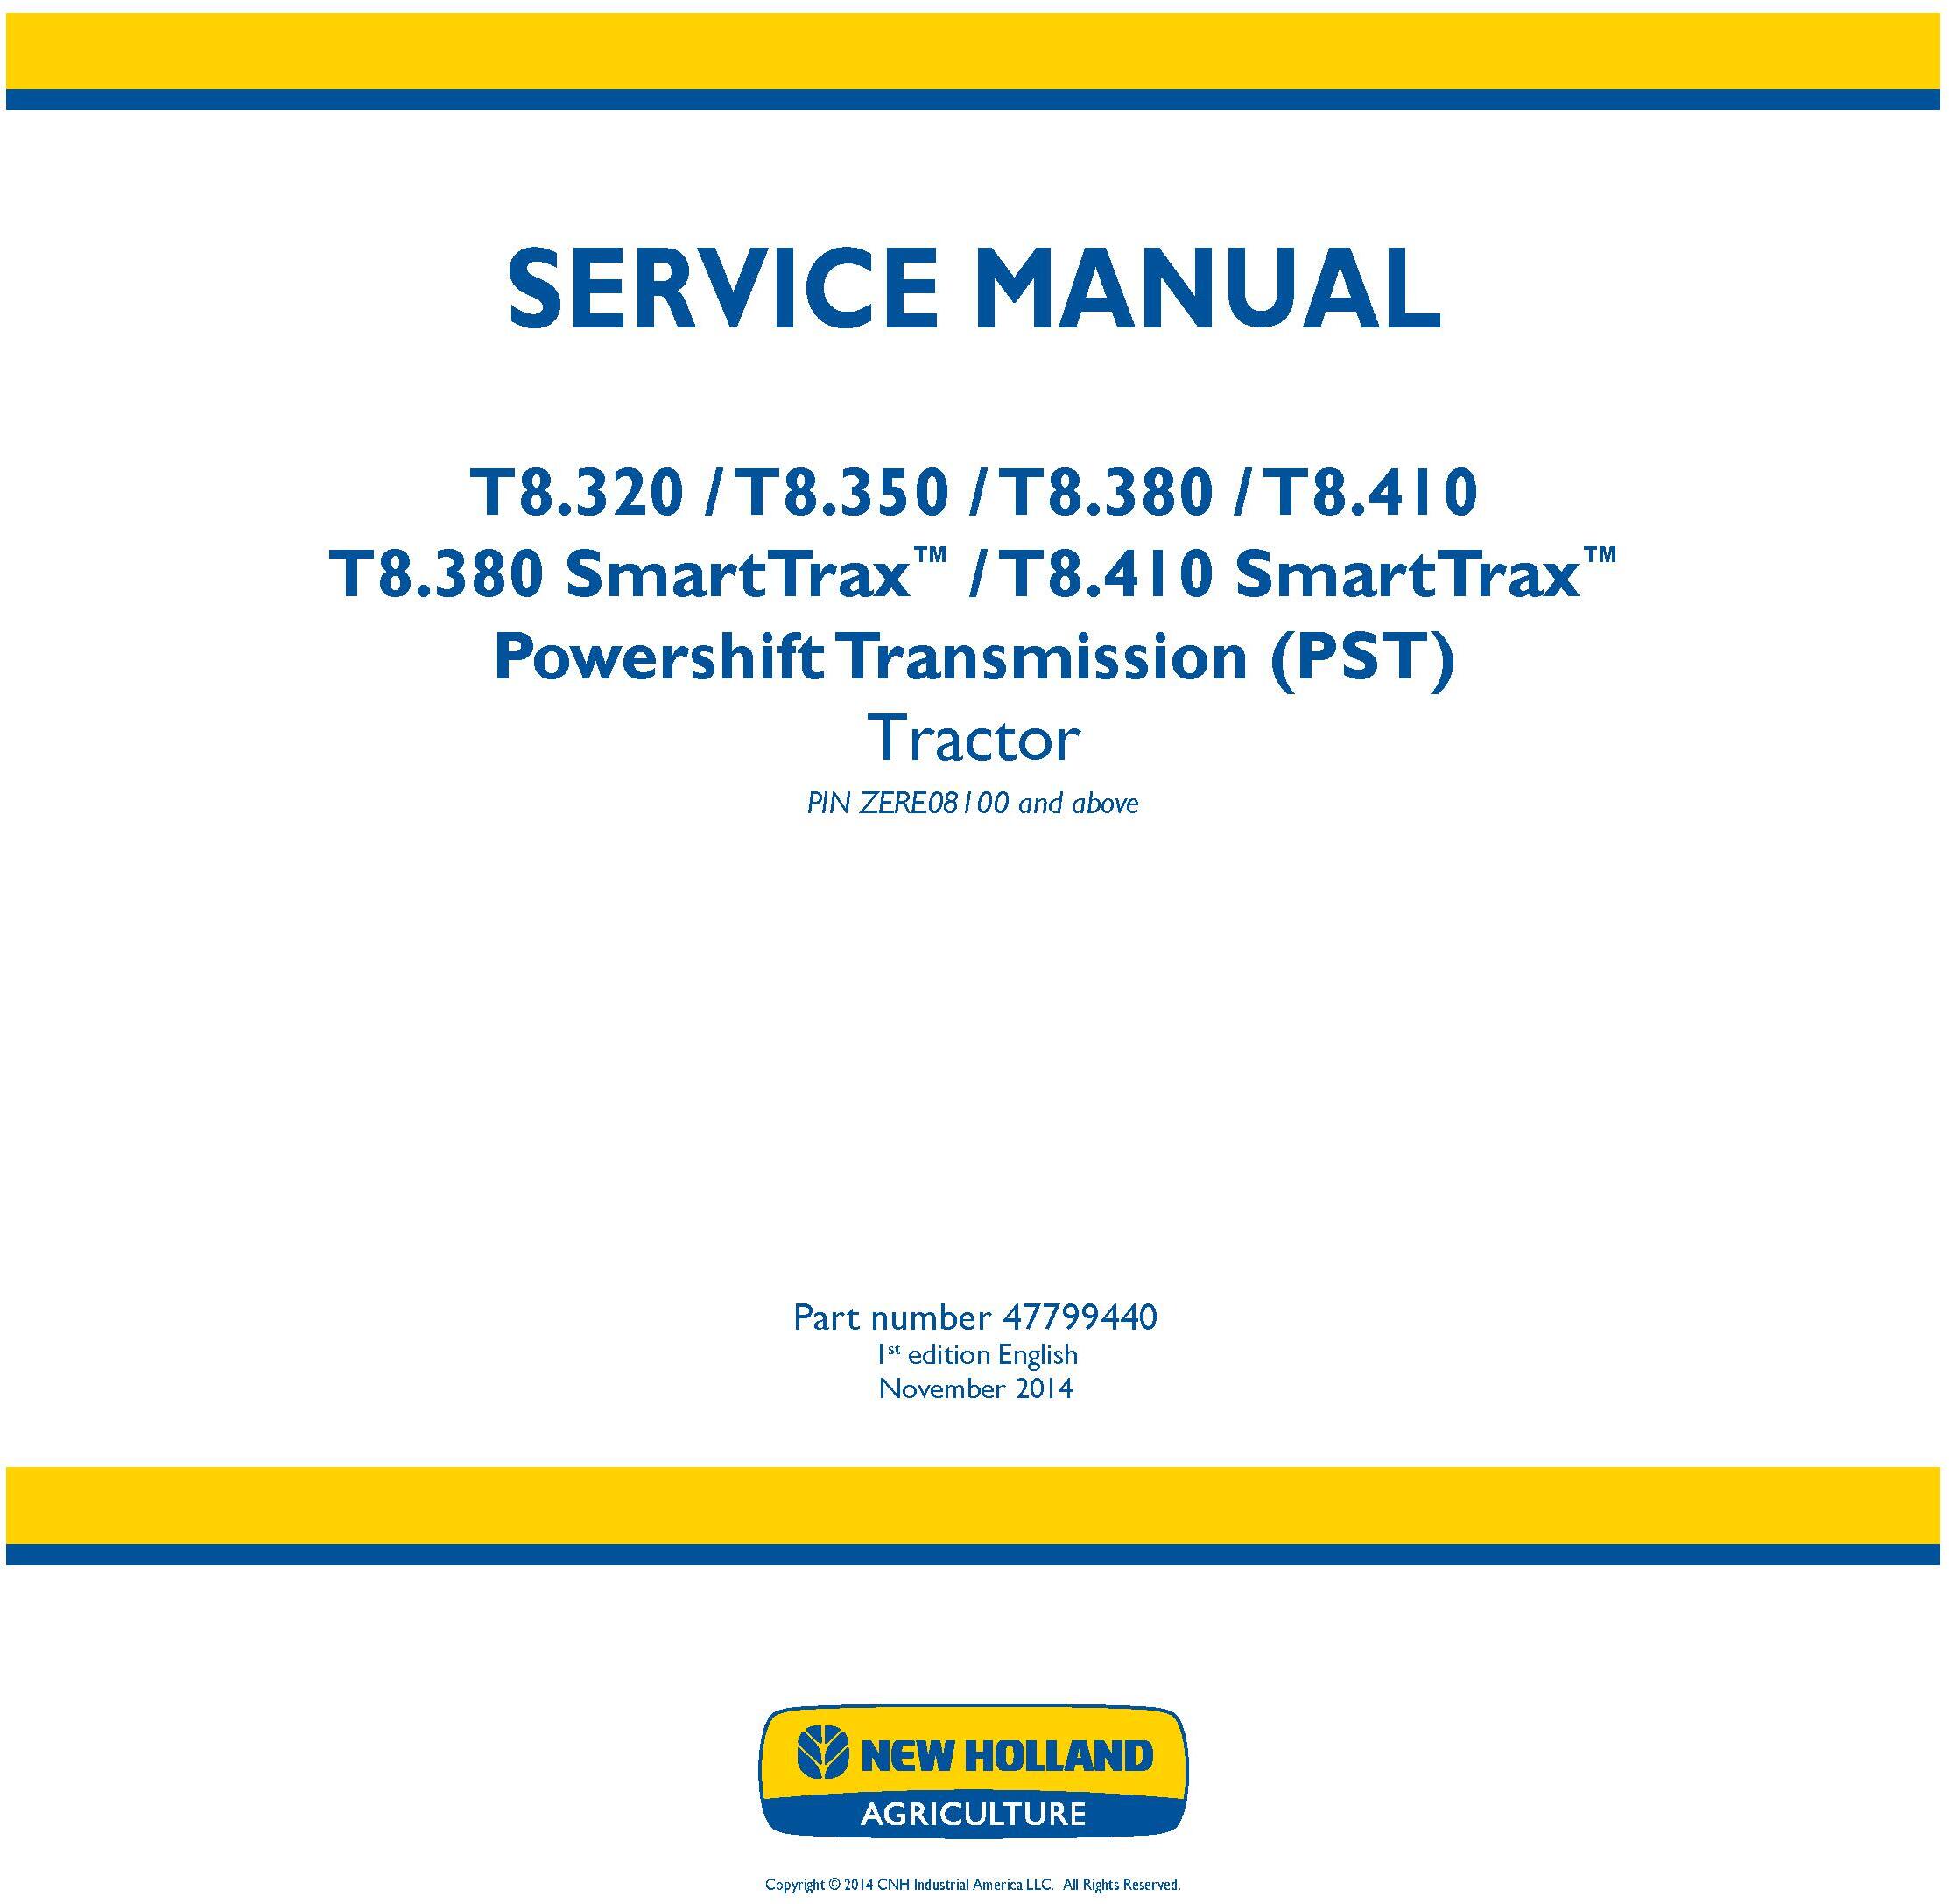 New Holland T8.320, T8.350, T8.380, T8.410 and SmartTrax with PS Transmission Tractor Service Manual - 19416